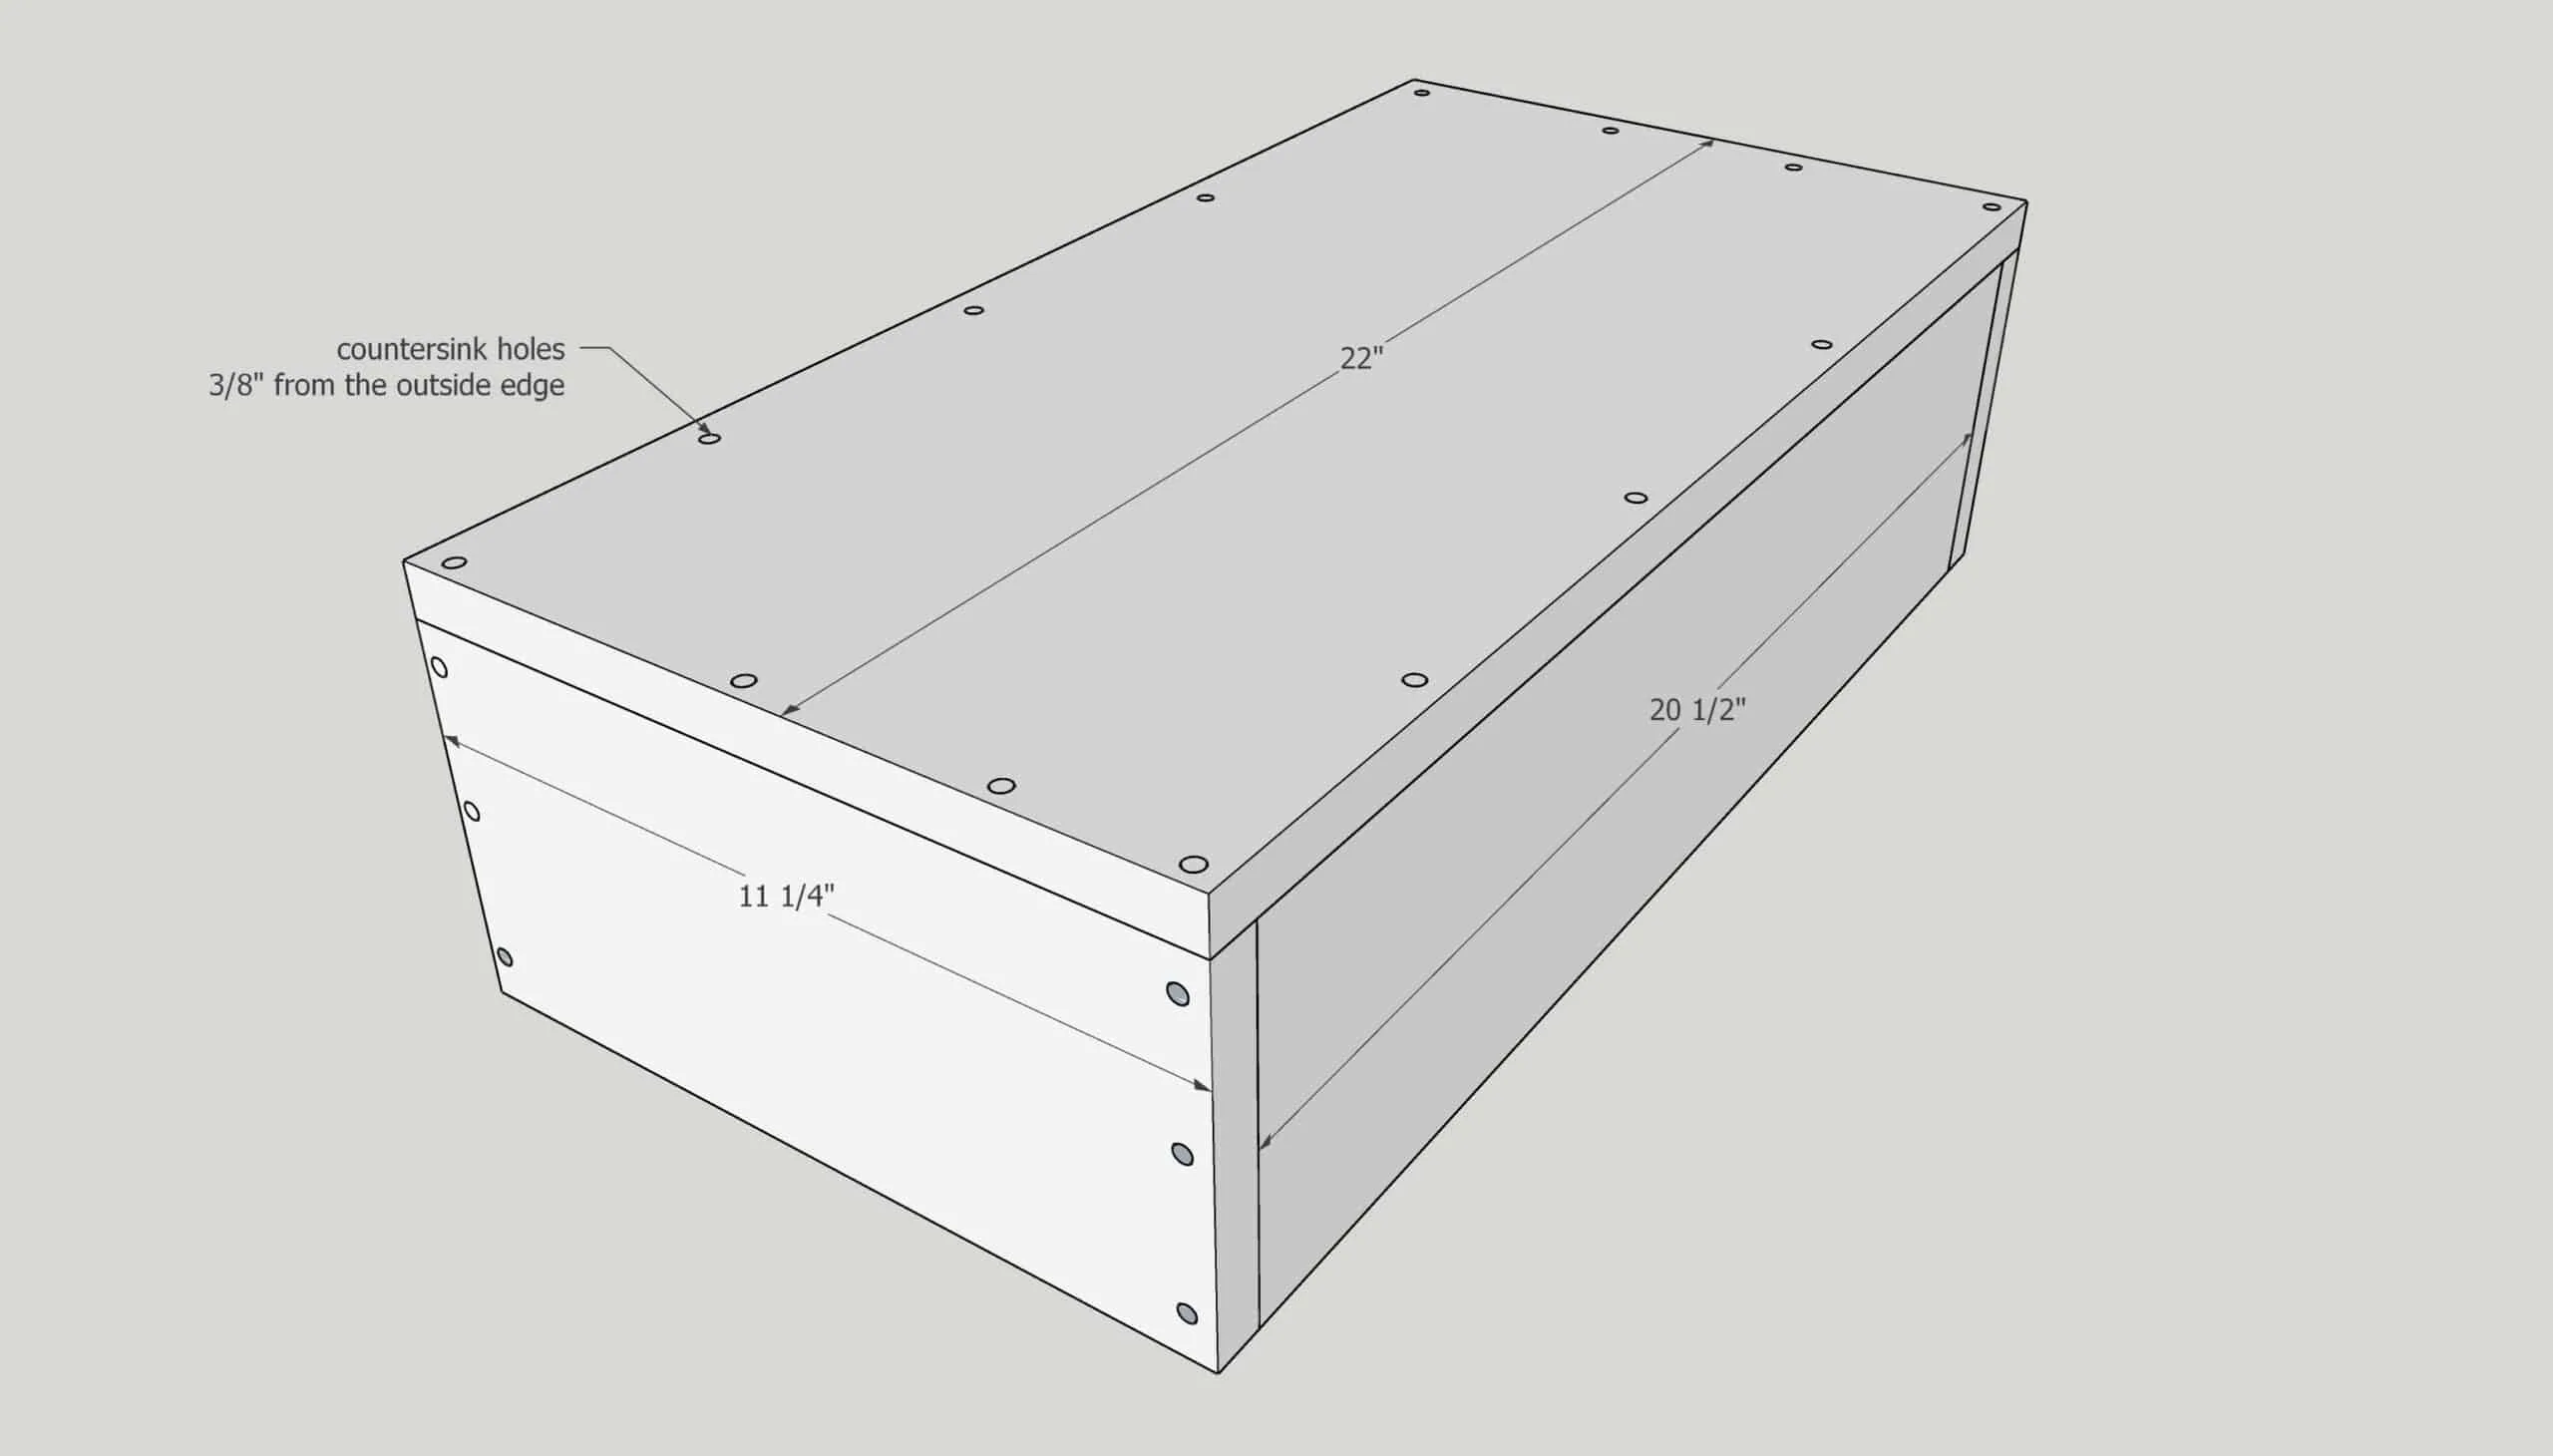 countersink holes along edges of trash can cabinet drawer box